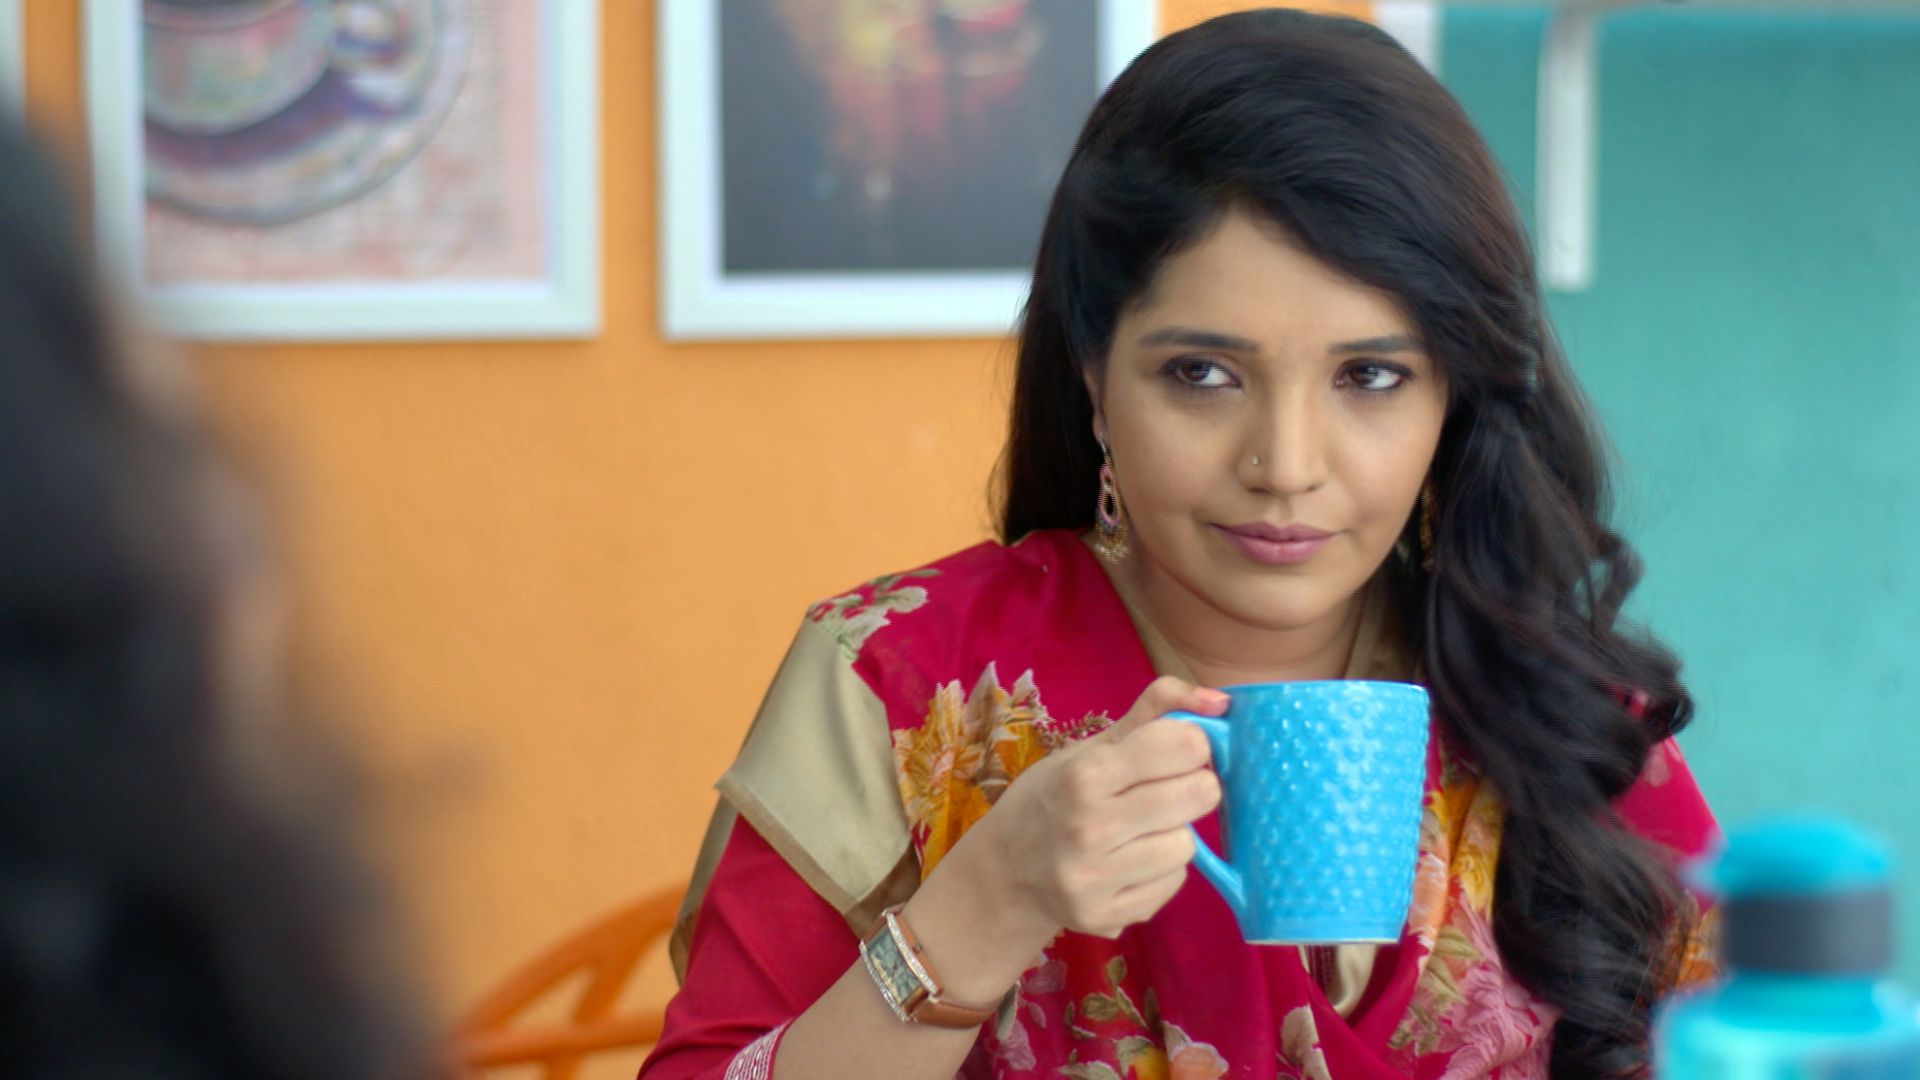 Ajunahi Barsaat Aah Leading Actor Drinking Tea From A Blue Cup